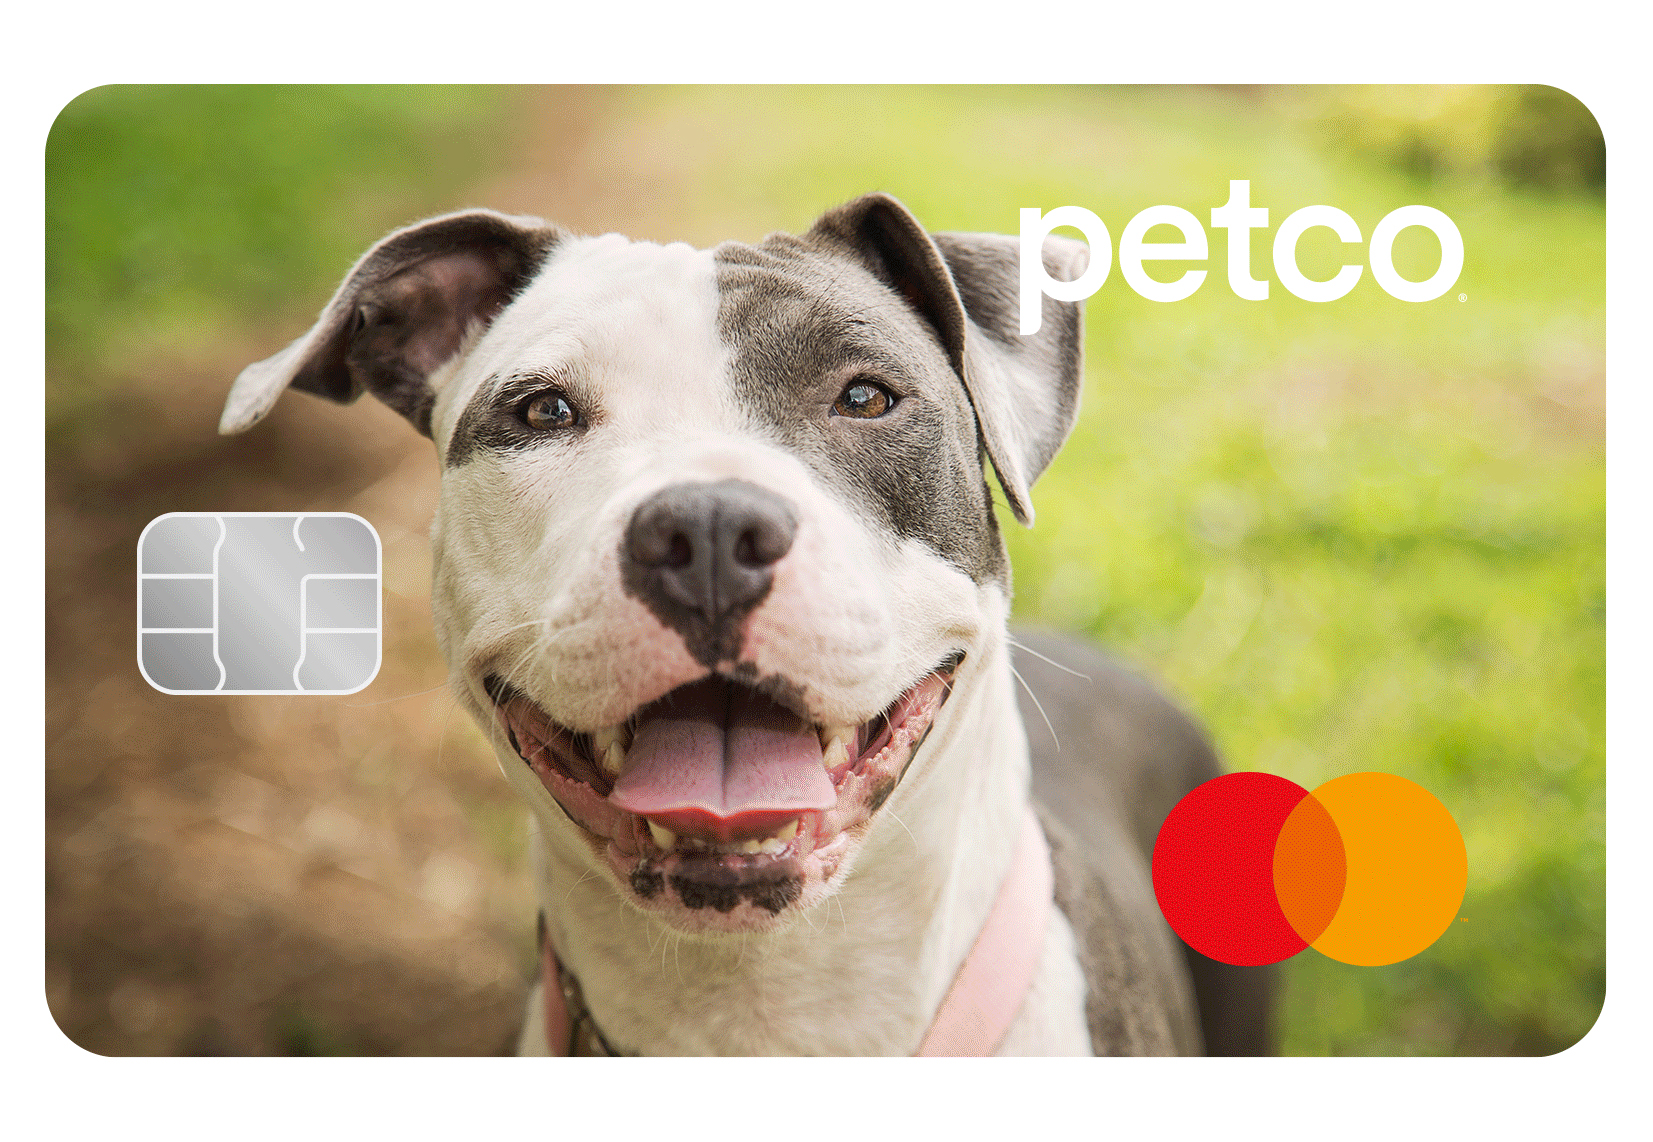 Petco Pay Mastercard Credit Card: Get 20% Off Your First Purchase at Petco